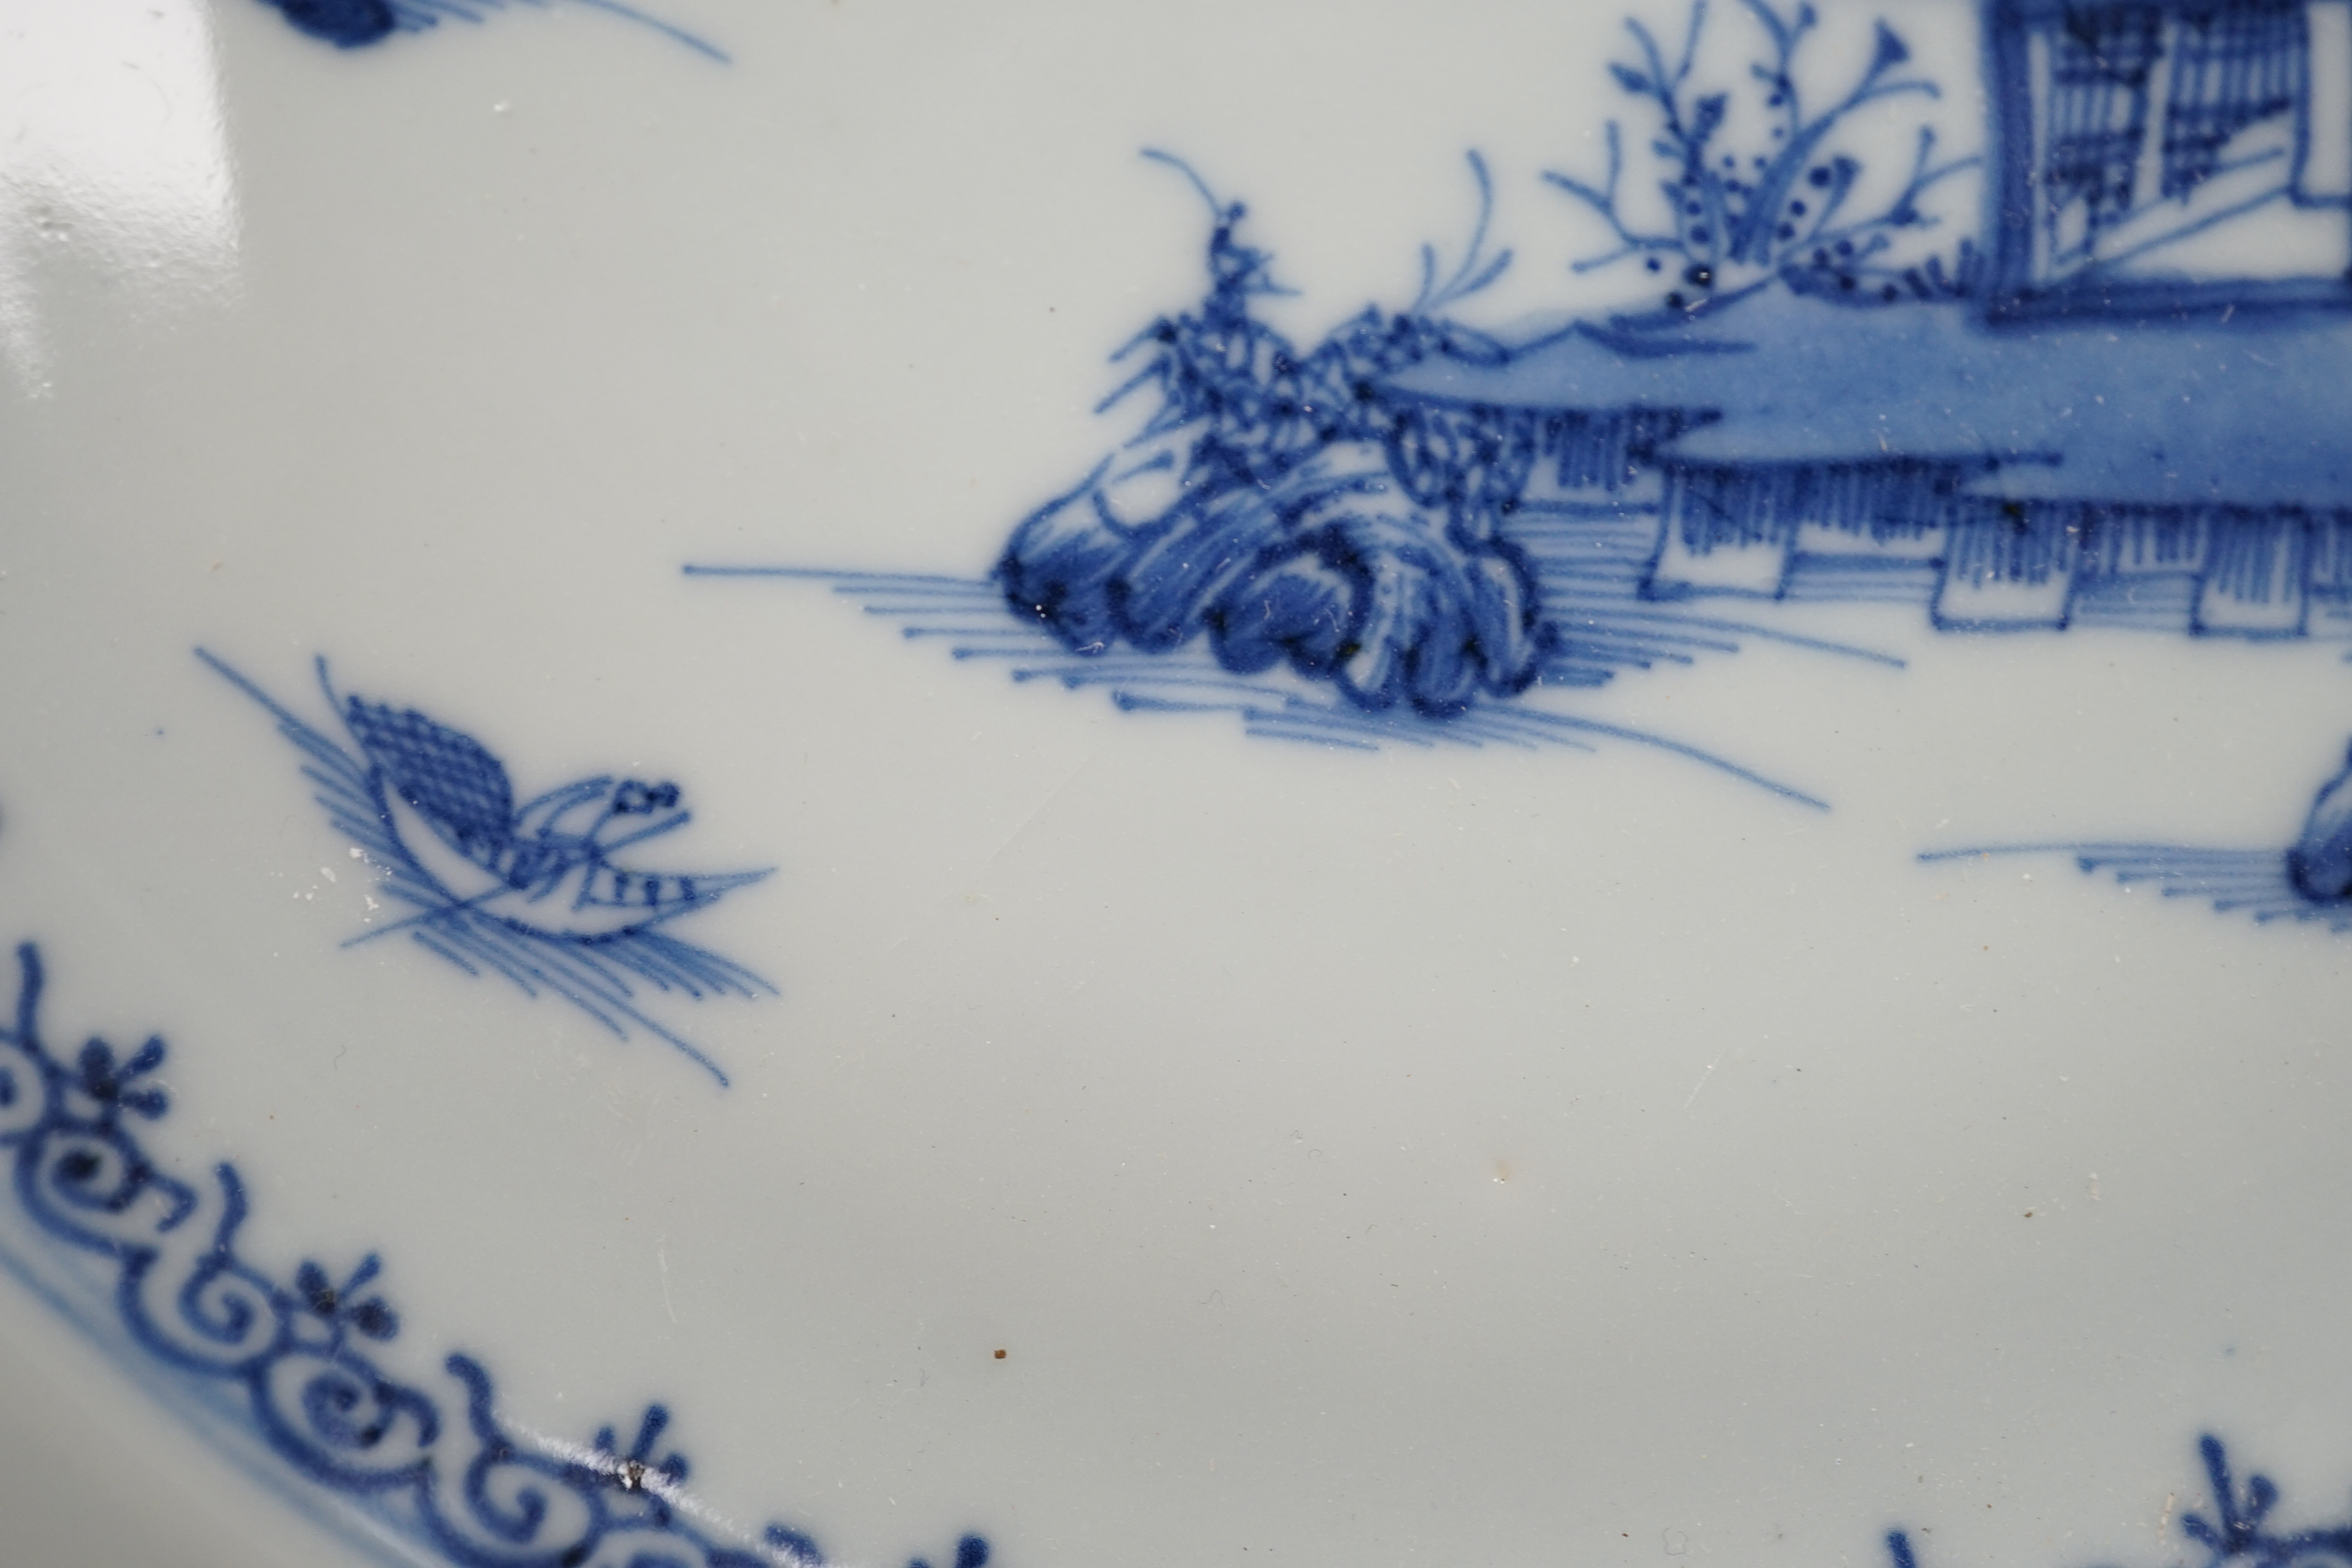 A set of twelve Chinese Nanking Cargo ‘Boatman’ blue and white plates, Qianlong period